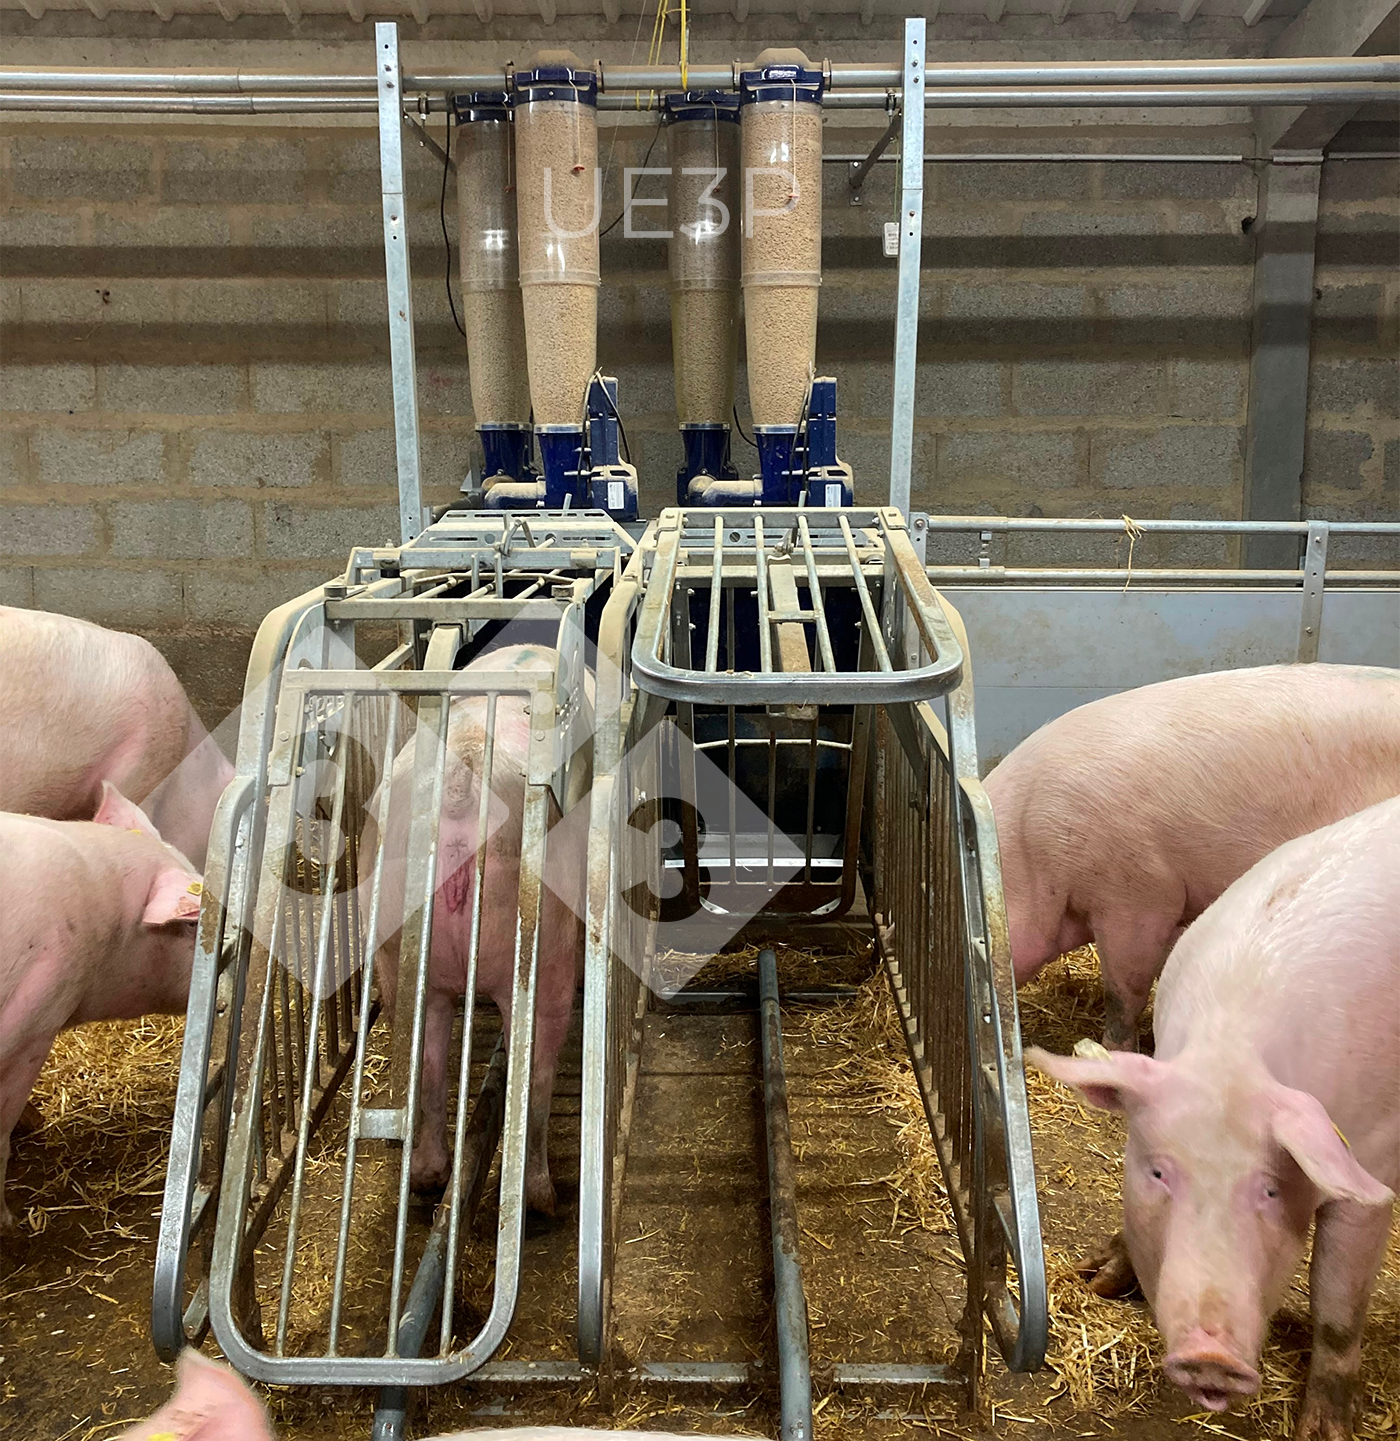 Automatic feeders in a gestation room at UE3P